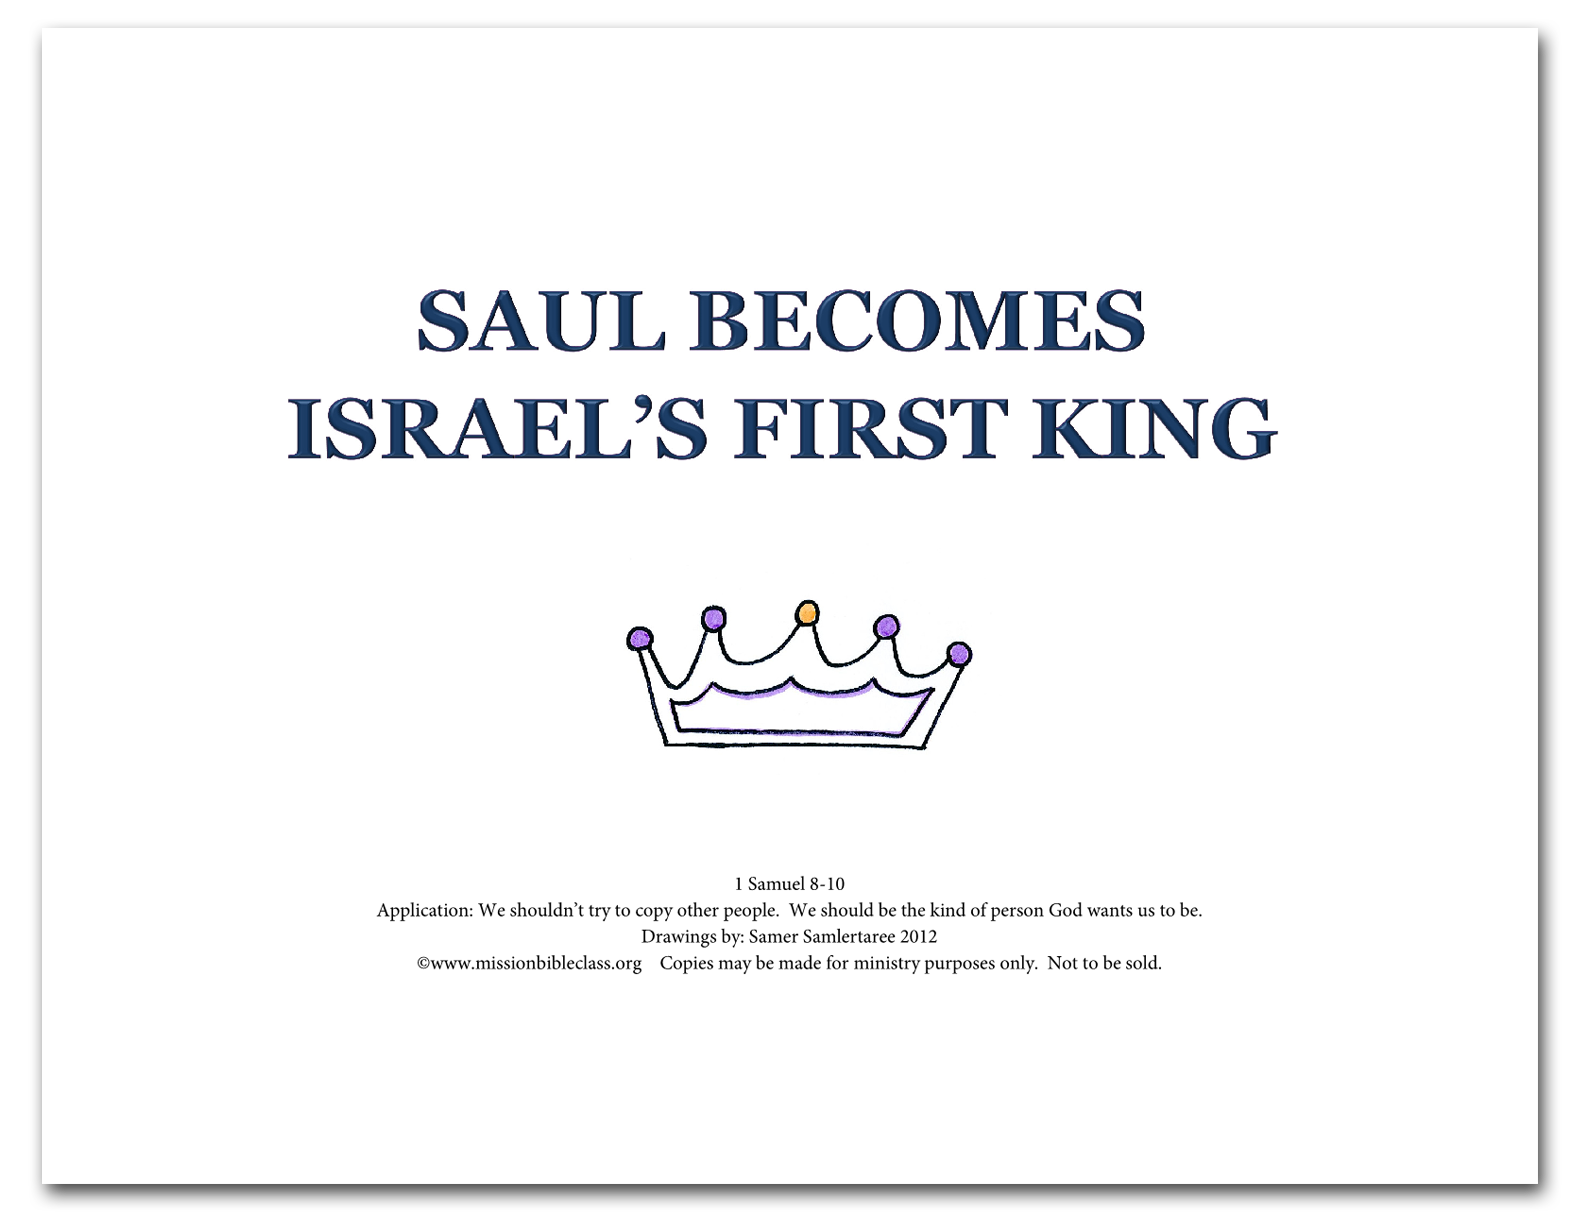 saul-becomes-1st-king_flip-chart-cover